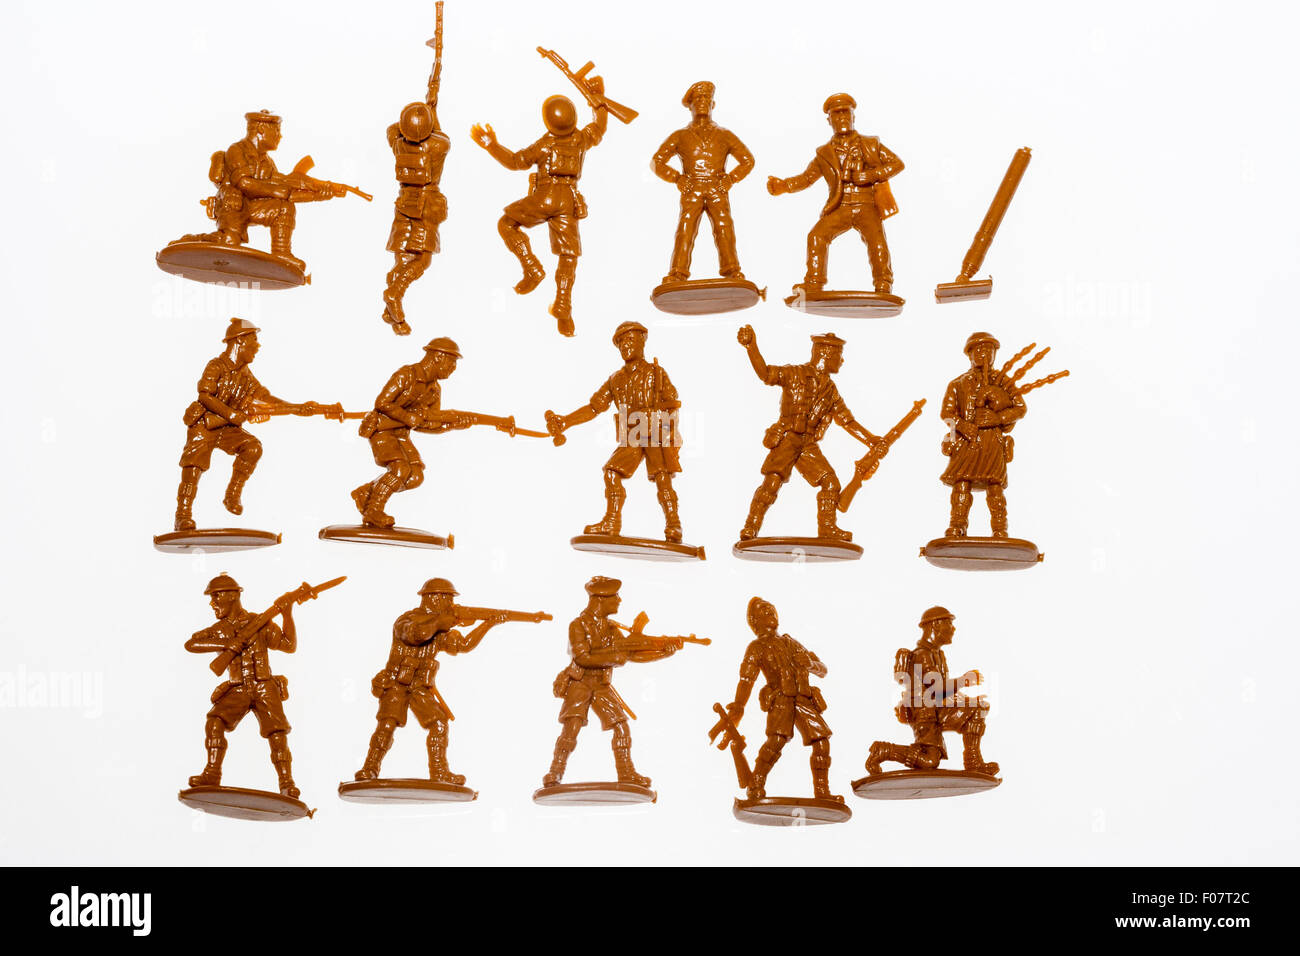 Matchbox, HO/OO, 1/72 scale plastic model figures. World War Two, 8th army. Three rows of soldiers, various positions on plain white background. Stock Photo